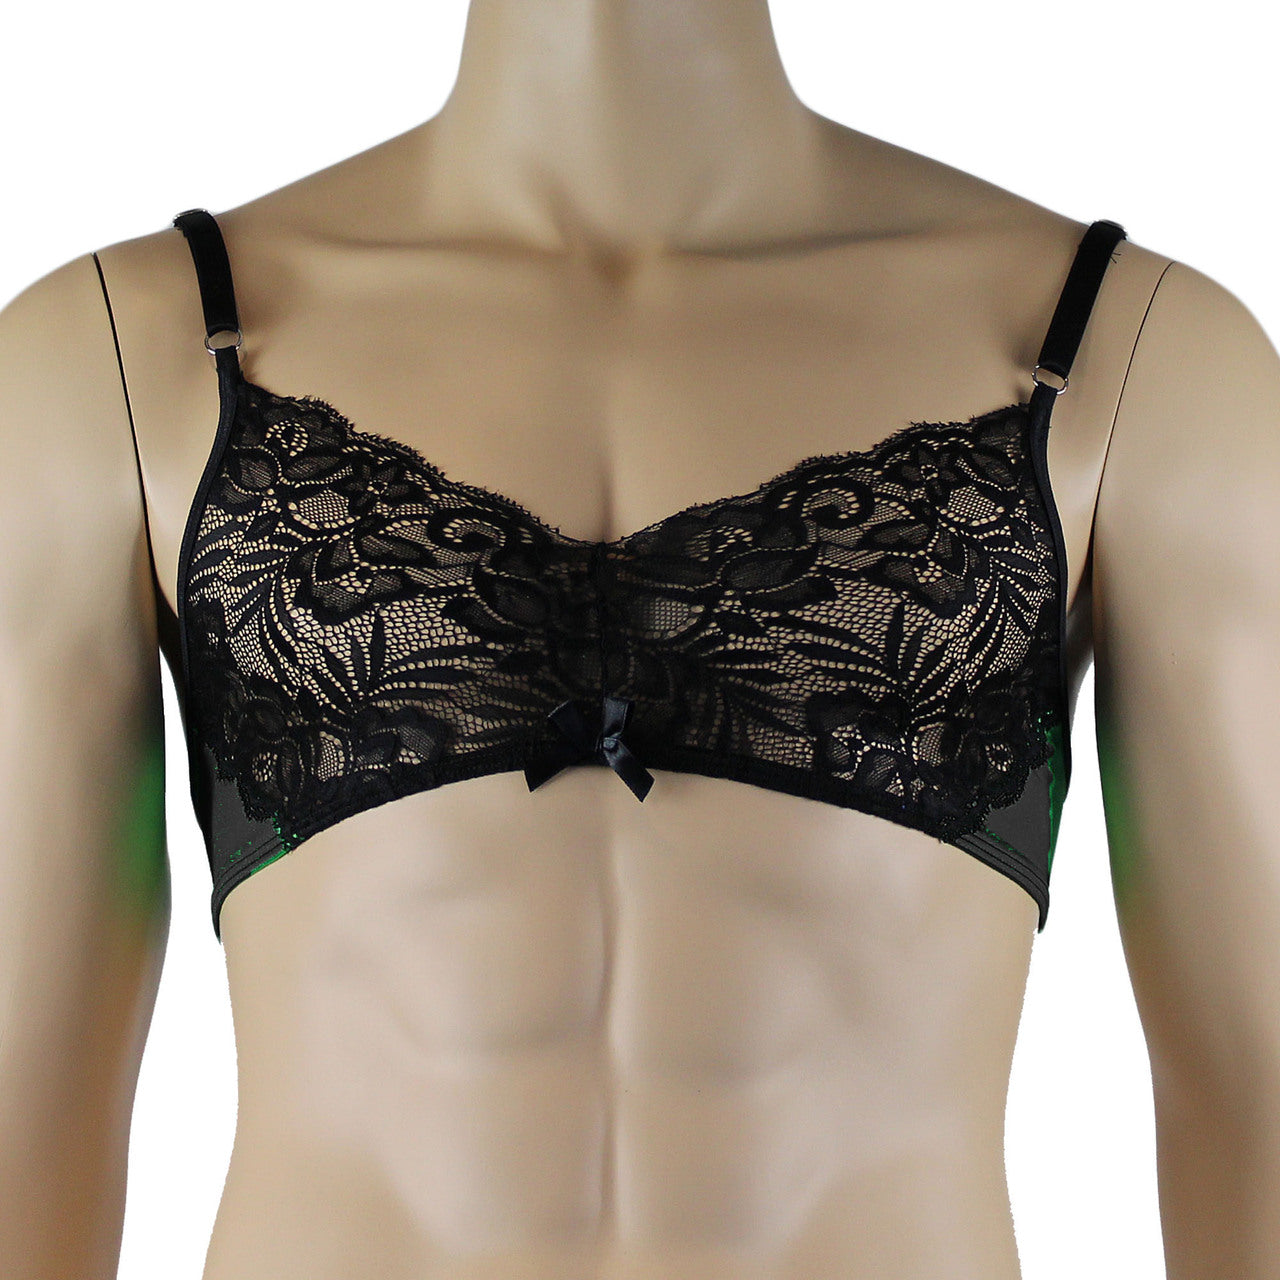 Mens Risque Bra Top (black and black plus other colours)